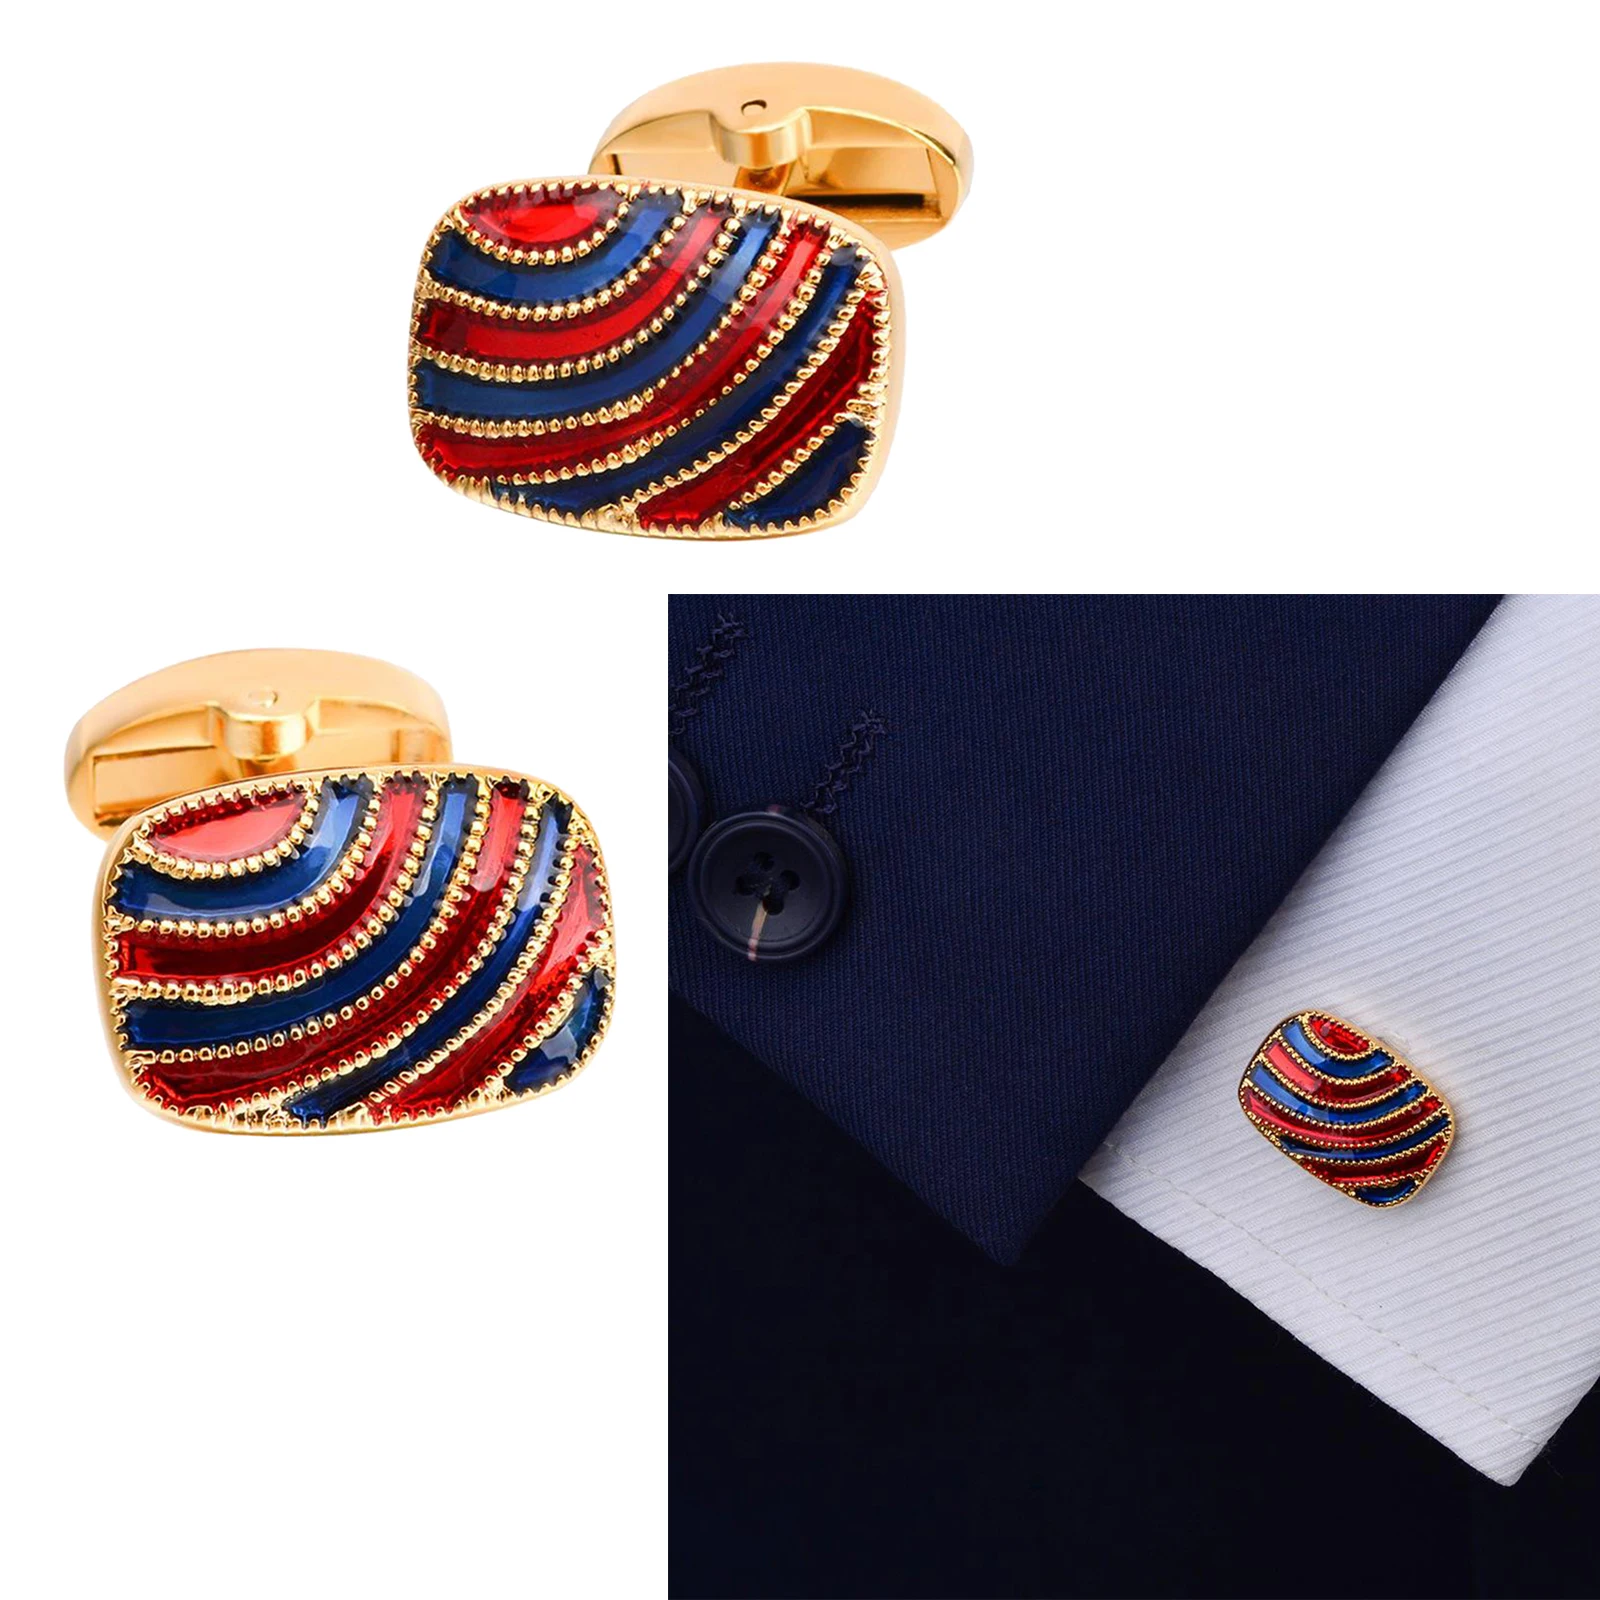 2 Packs Cuff Links Cuff Men's Shirts Jewelry Gift for Suits Uniform Jacket